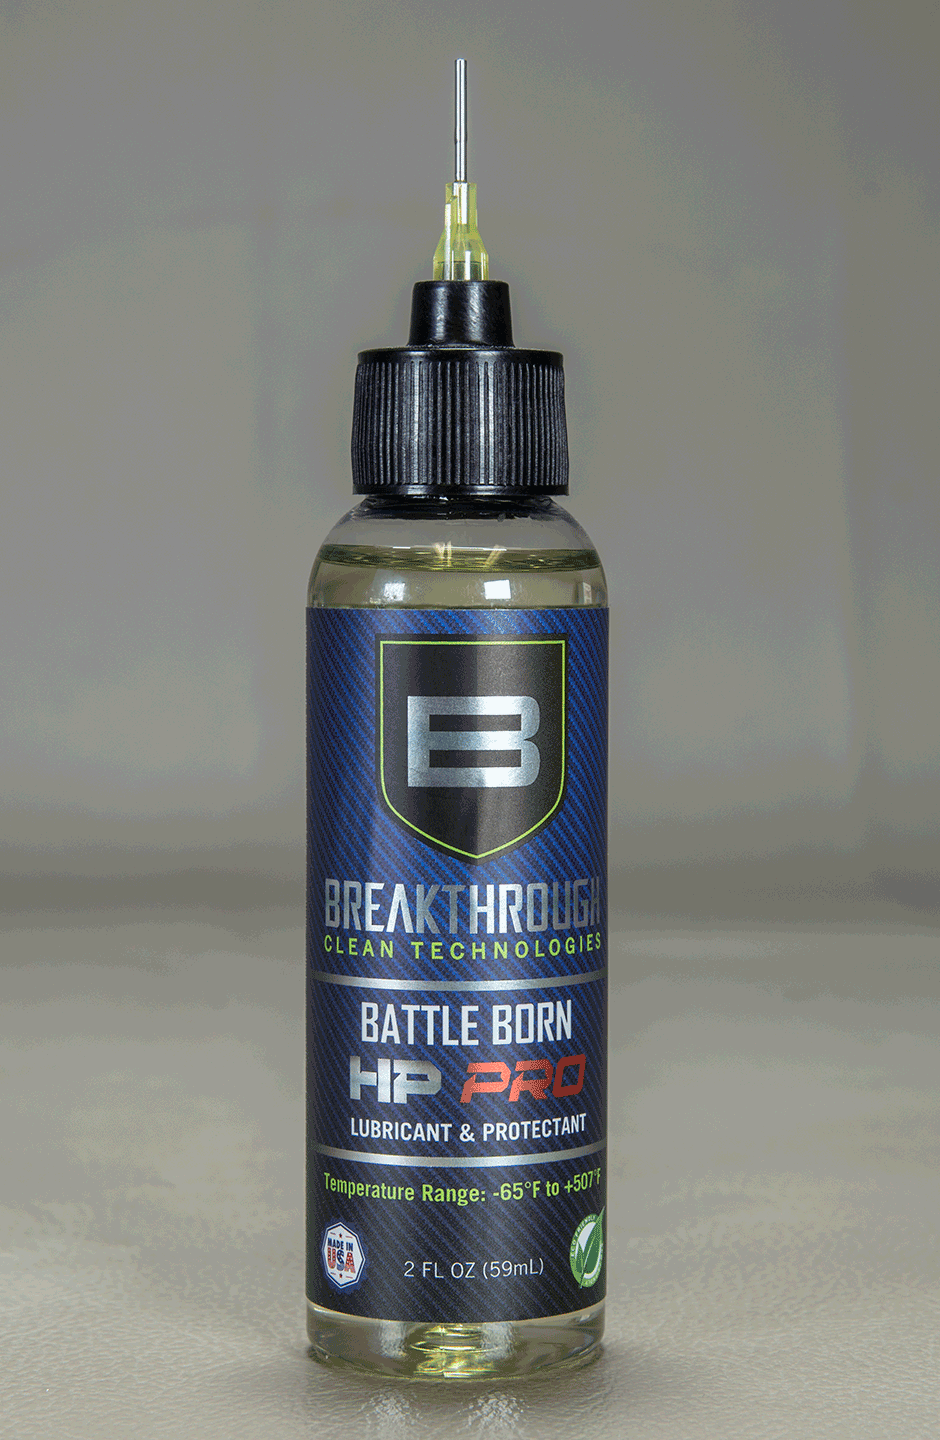 Breakthrough Battle Born HP Pro Lubricant and Protectant